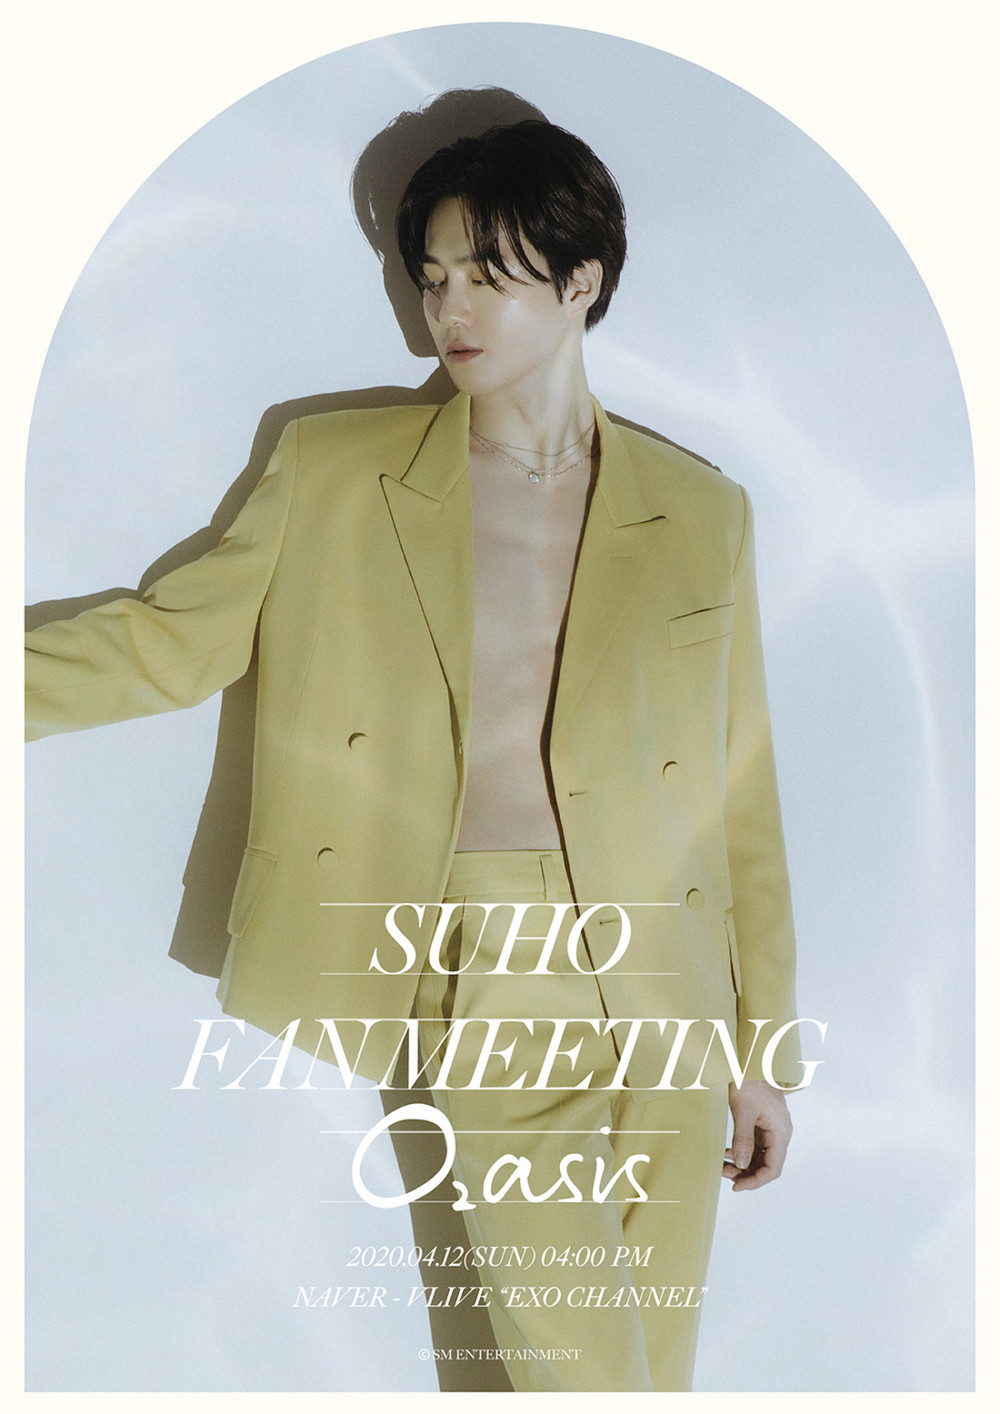 exo-suho-reveals-posters-for-his-online-solo-fan-meeting-o2asis-2